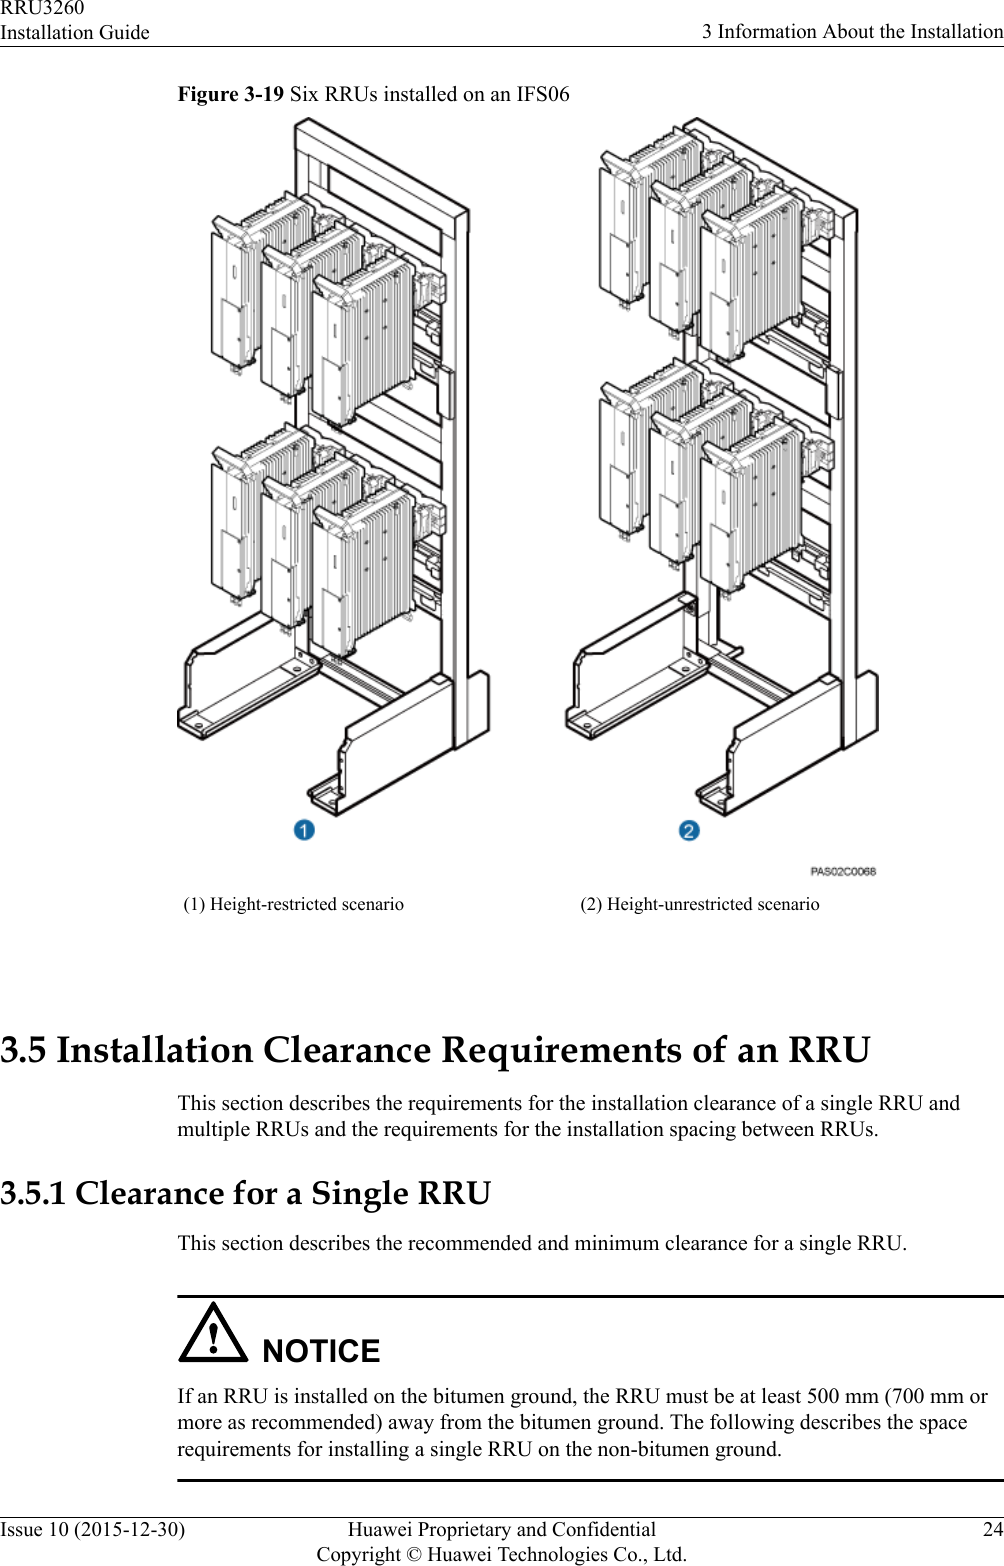 Figure 3-19 Six RRUs installed on an IFS06(1) Height-restricted scenario (2) Height-unrestricted scenario 3.5 Installation Clearance Requirements of an RRUThis section describes the requirements for the installation clearance of a single RRU andmultiple RRUs and the requirements for the installation spacing between RRUs.3.5.1 Clearance for a Single RRUThis section describes the recommended and minimum clearance for a single RRU.NOTICEIf an RRU is installed on the bitumen ground, the RRU must be at least 500 mm (700 mm ormore as recommended) away from the bitumen ground. The following describes the spacerequirements for installing a single RRU on the non-bitumen ground.RRU3260Installation Guide 3 Information About the InstallationIssue 10 (2015-12-30) Huawei Proprietary and ConfidentialCopyright © Huawei Technologies Co., Ltd.24